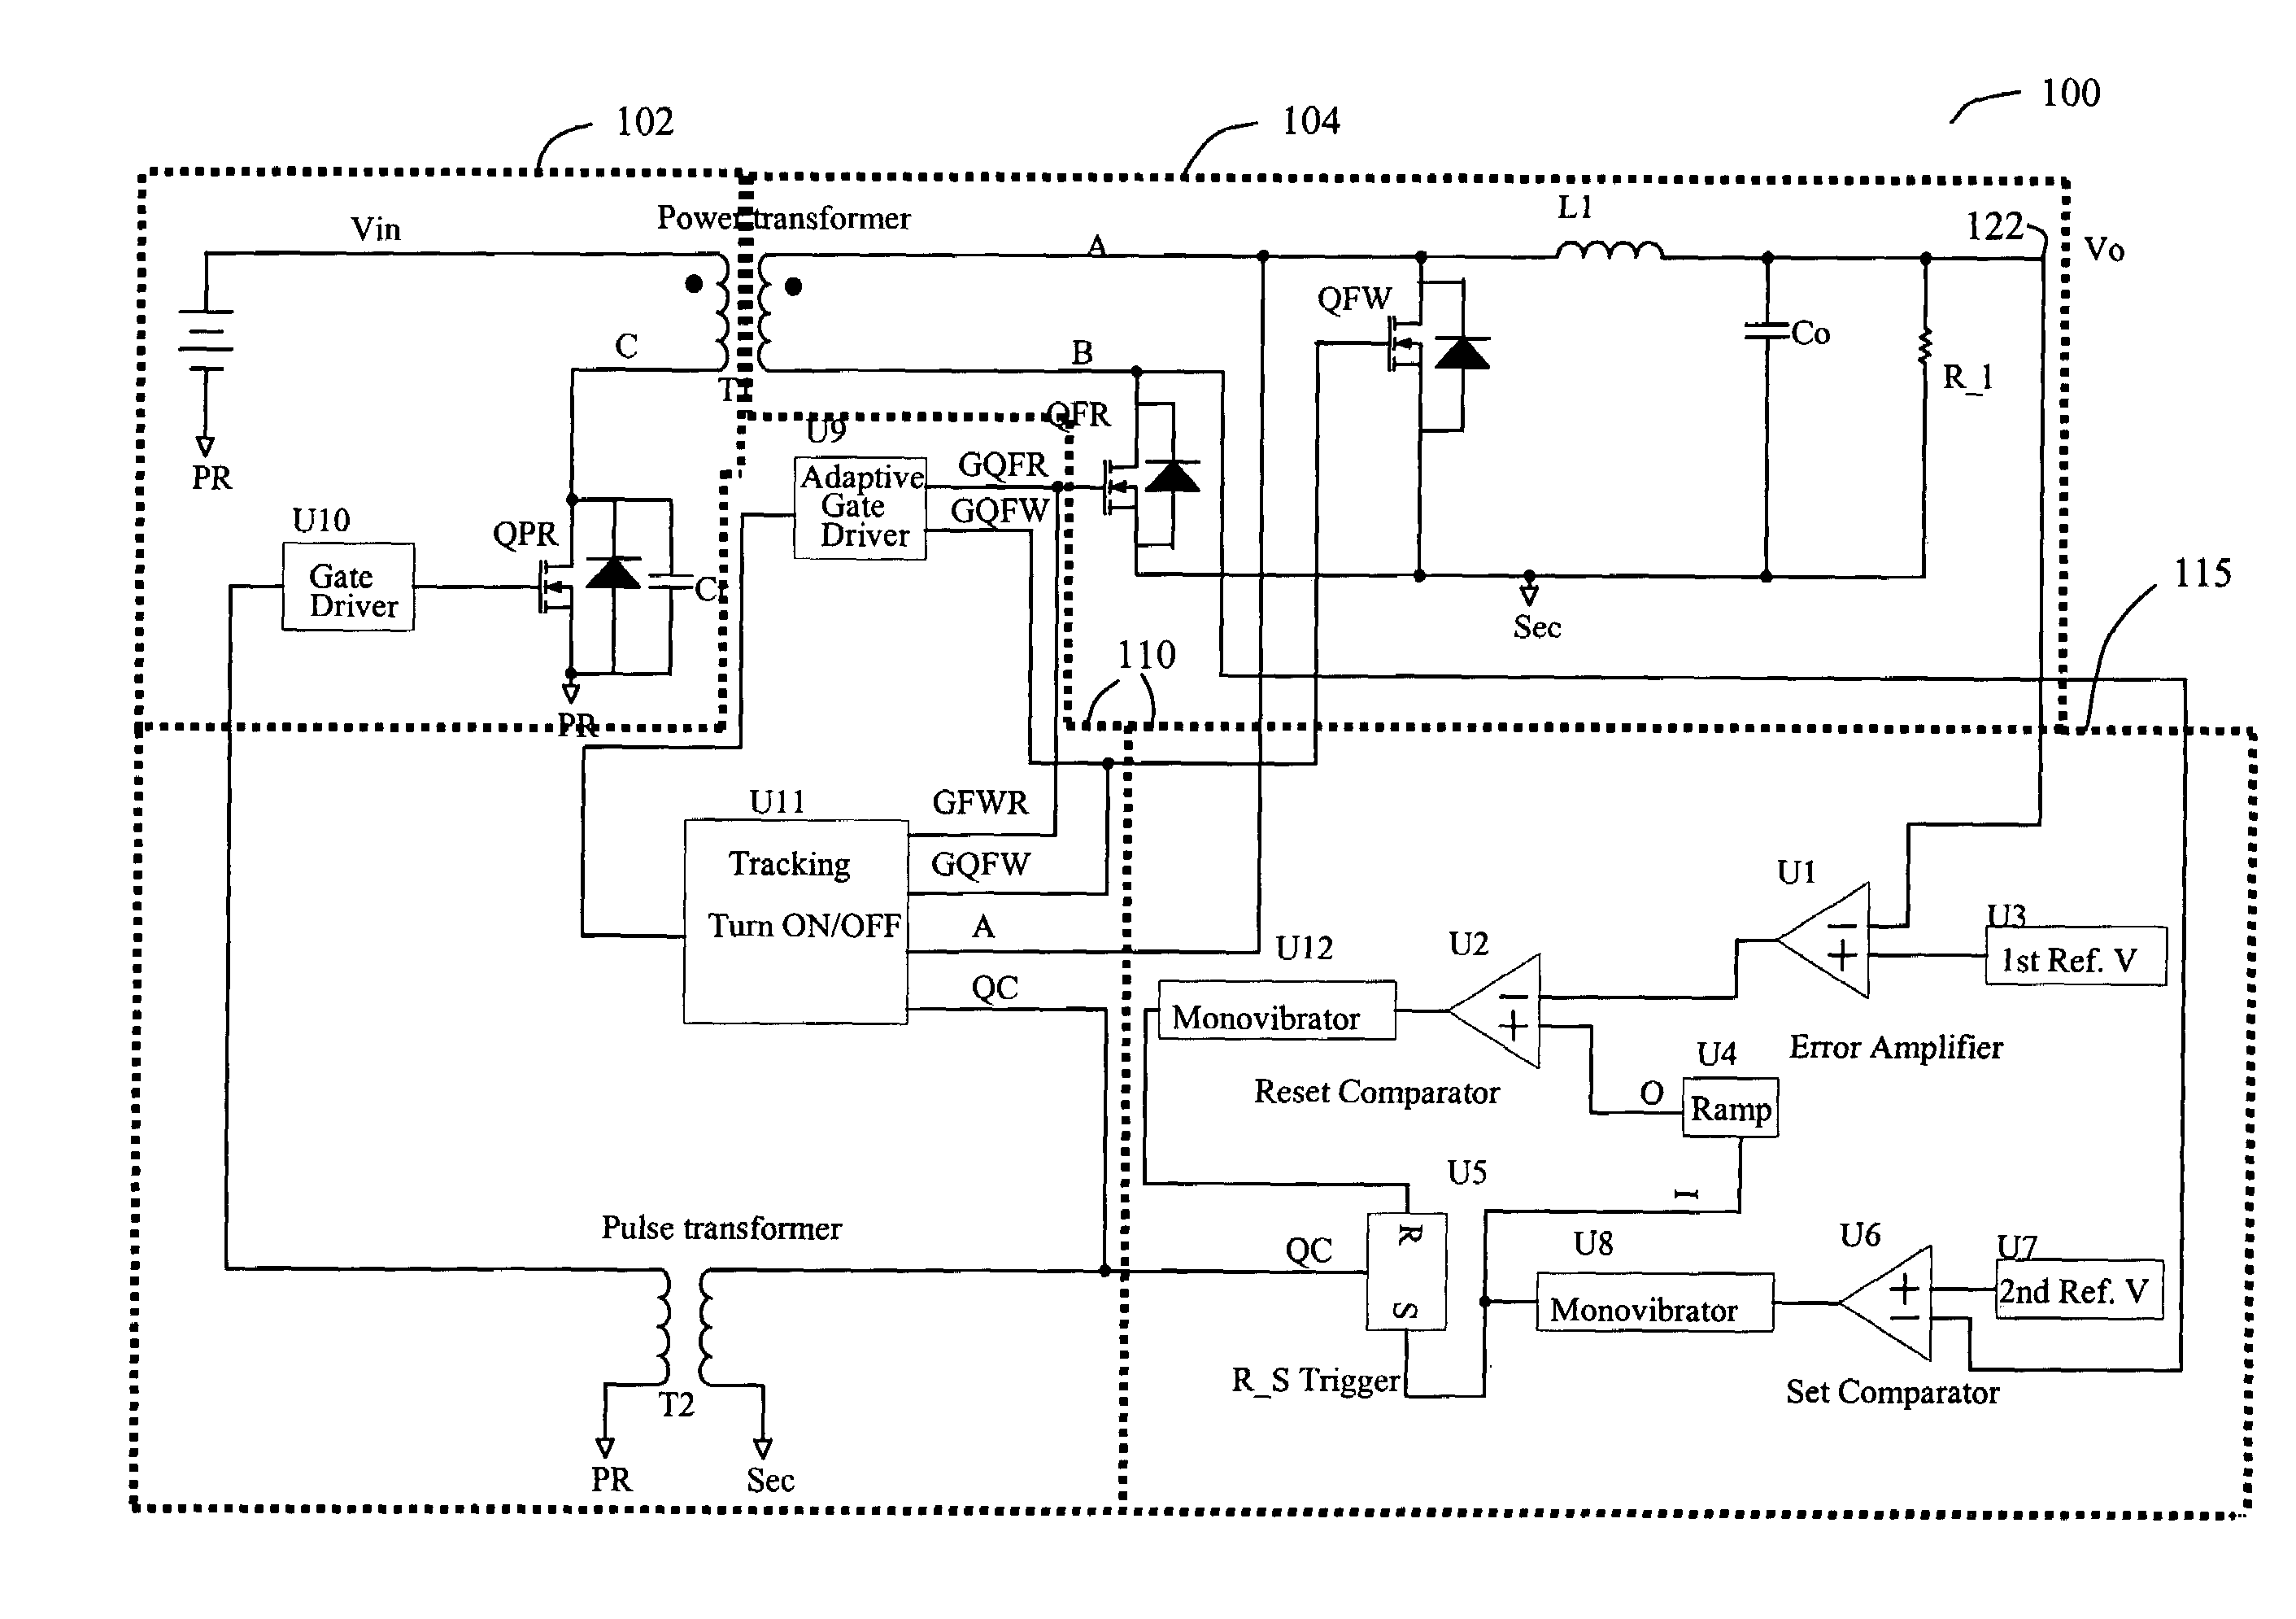 Control circuit with tracking turn on/off delay for a single-ended forward converter with synchronous rectification